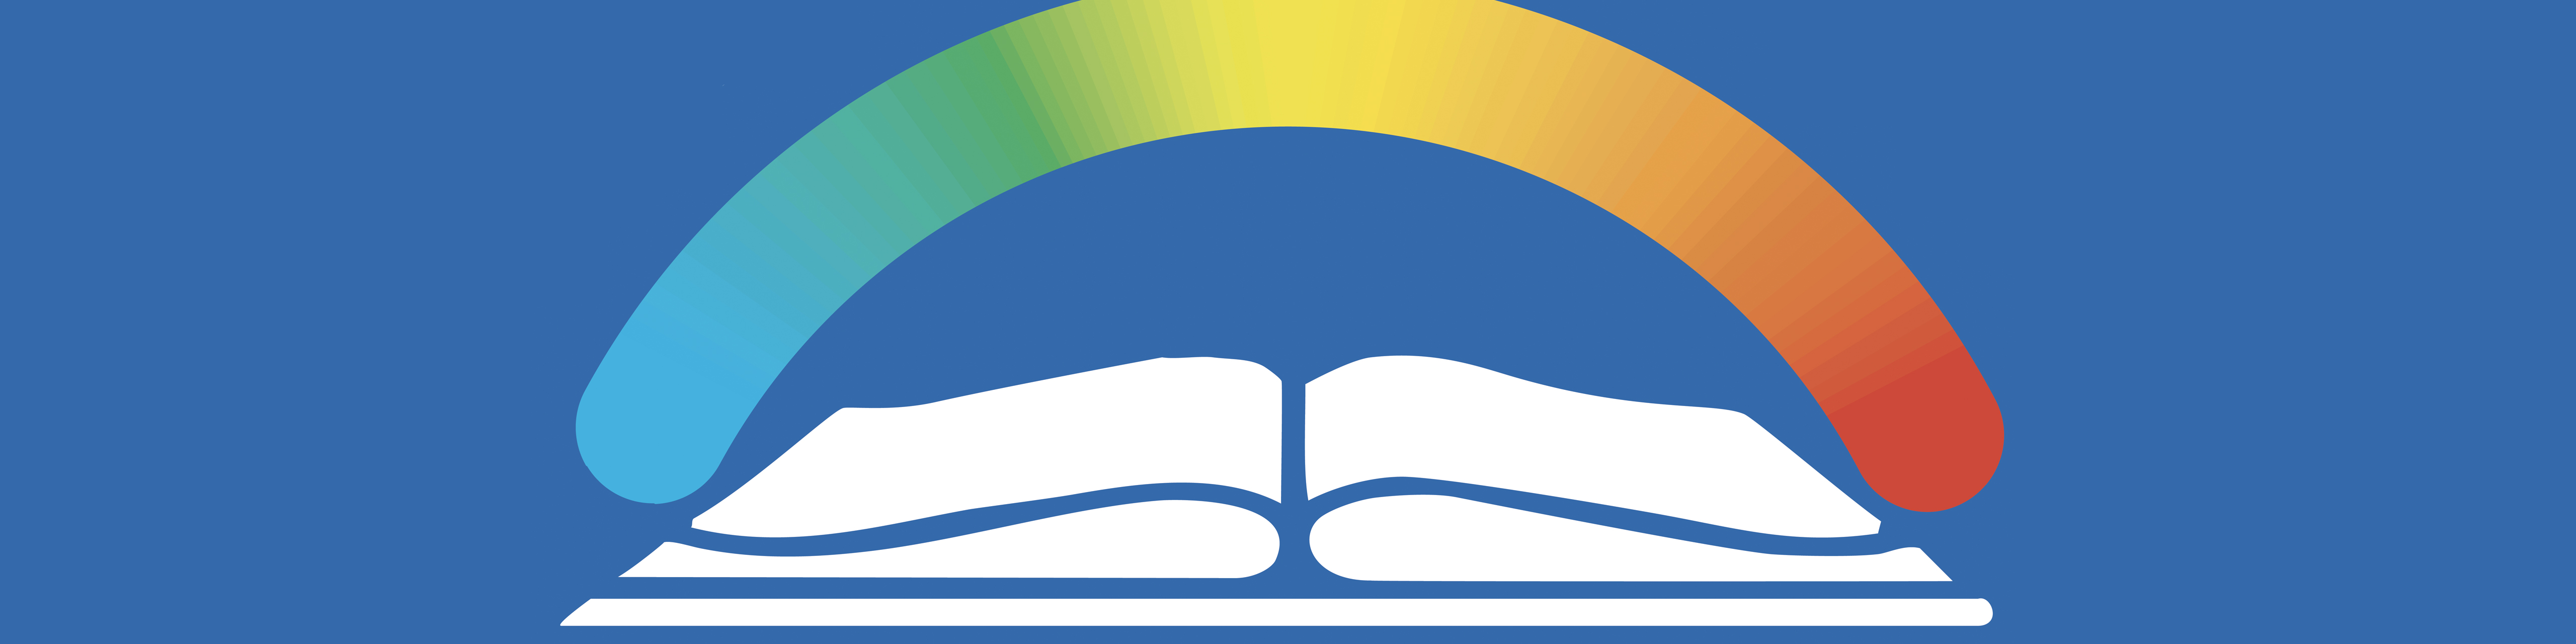 Illustration of open book with rainbow above it